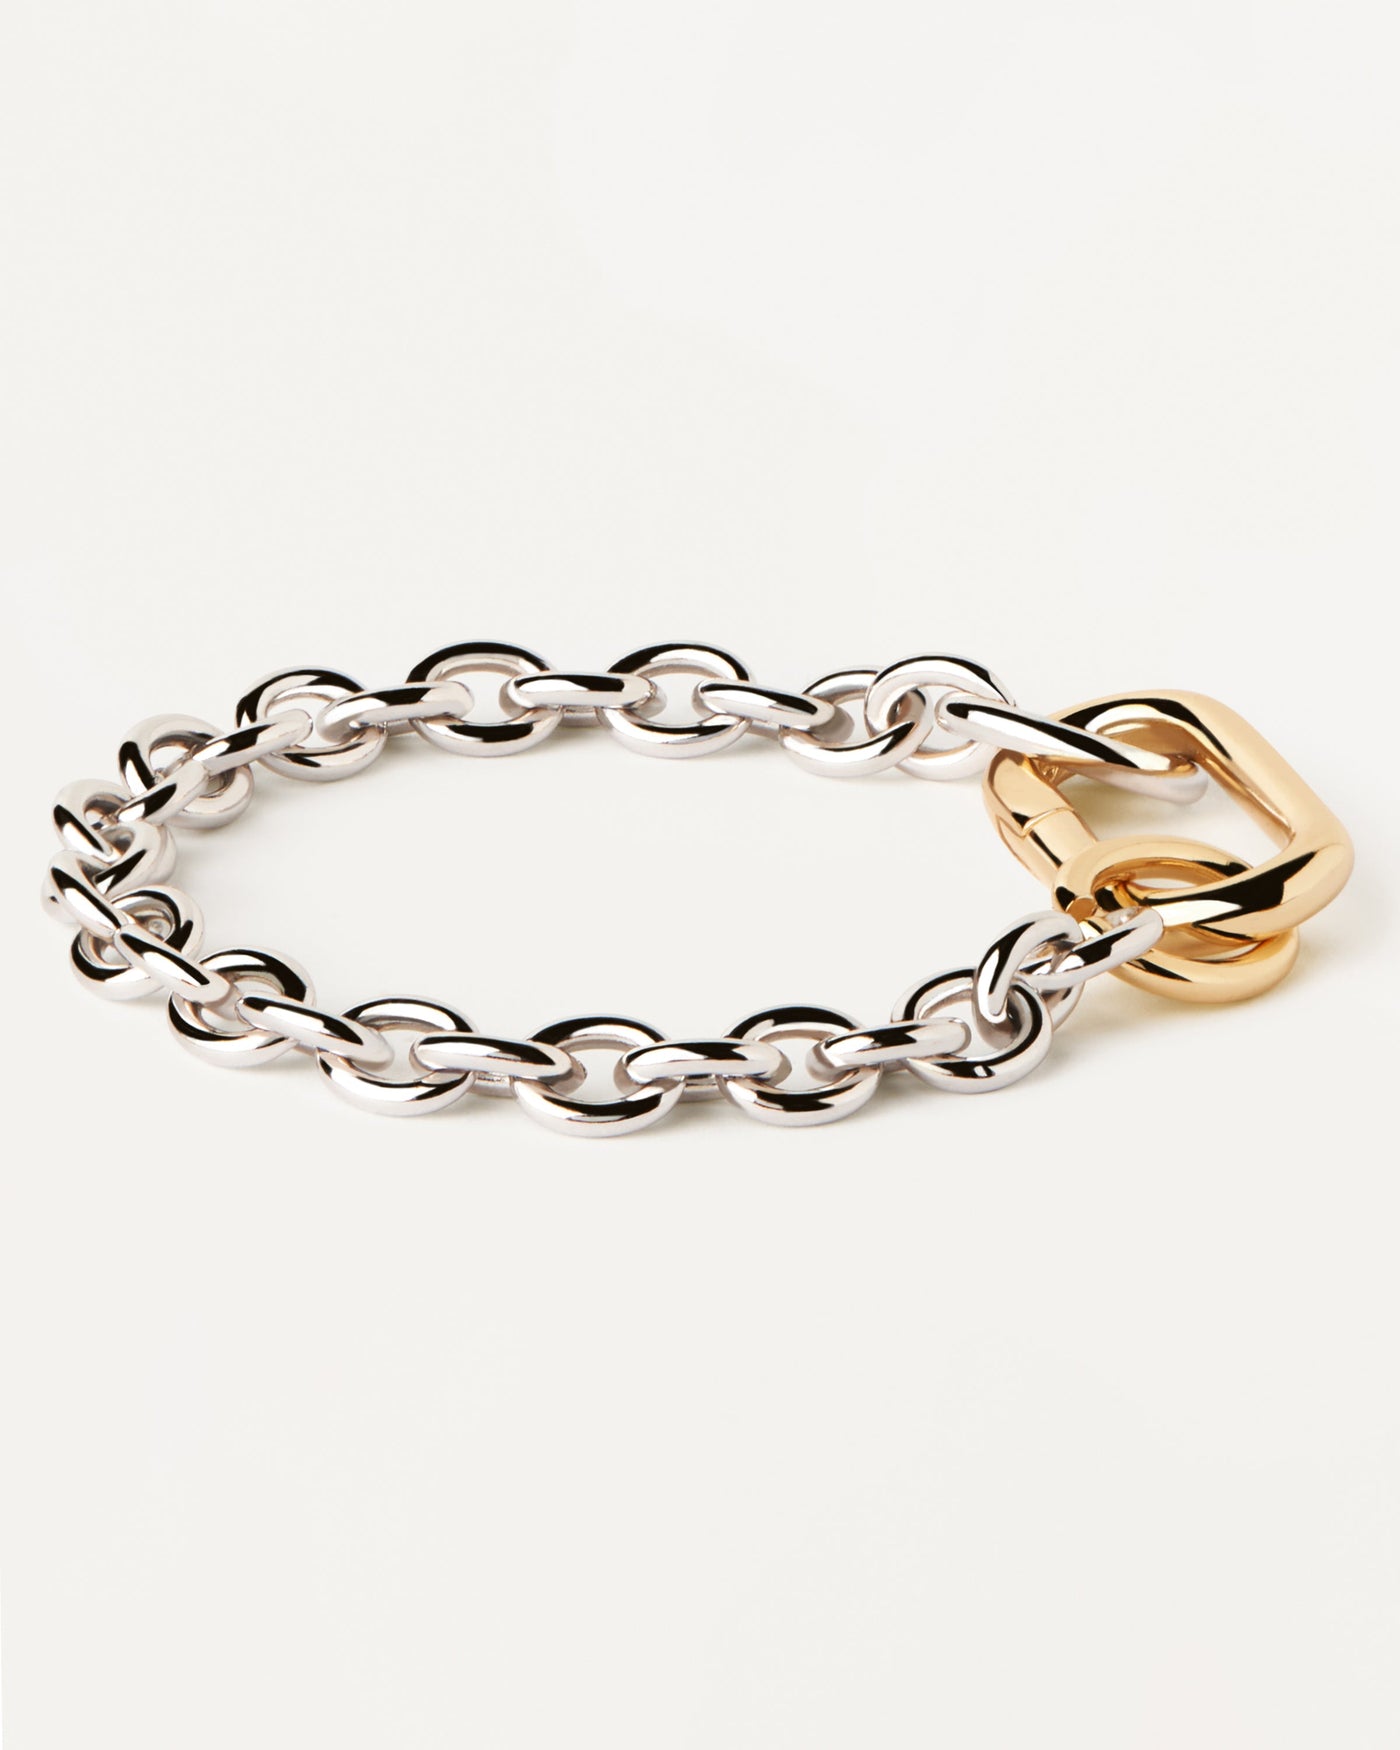 2023 Selection | Beat Chain Bracelet. Bicolor chain bracelet with silver links and bold gold-plated clasp. Get the latest arrival from PDPAOLA. Place your order safely and get this Best Seller. Free Shipping.